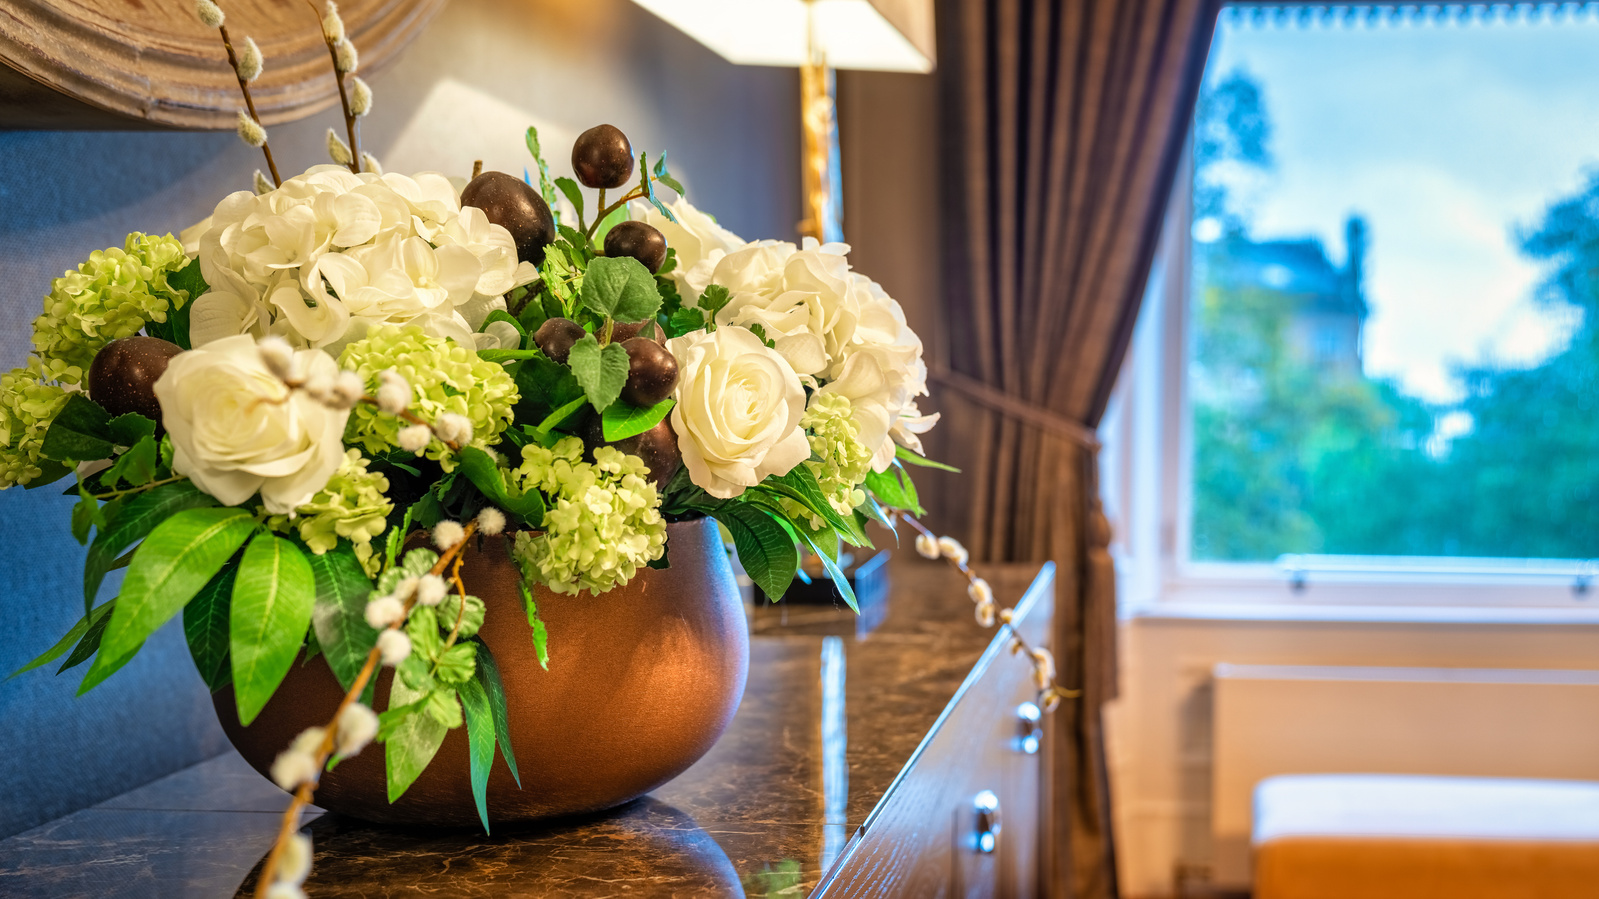 Flowers for Scotland Interior Property - Photography by Nate Cleary